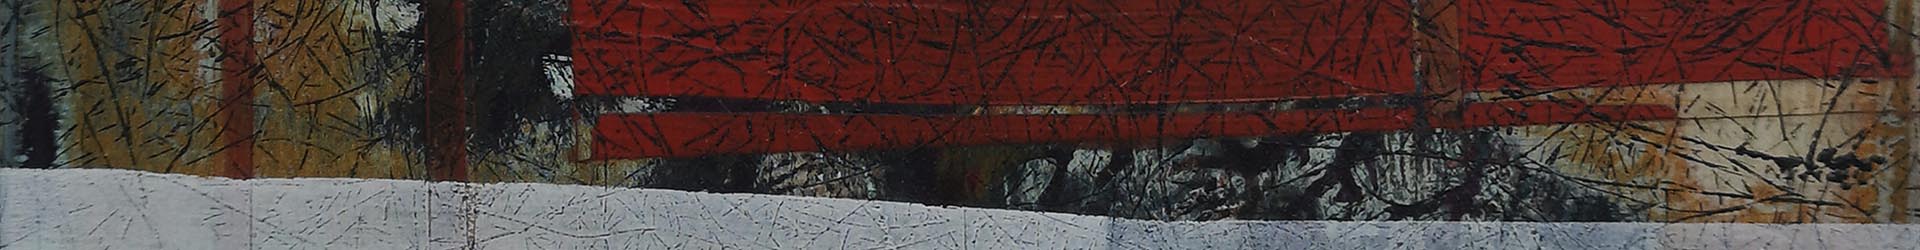 detail from oil painting Edge02 by Ian Harrold